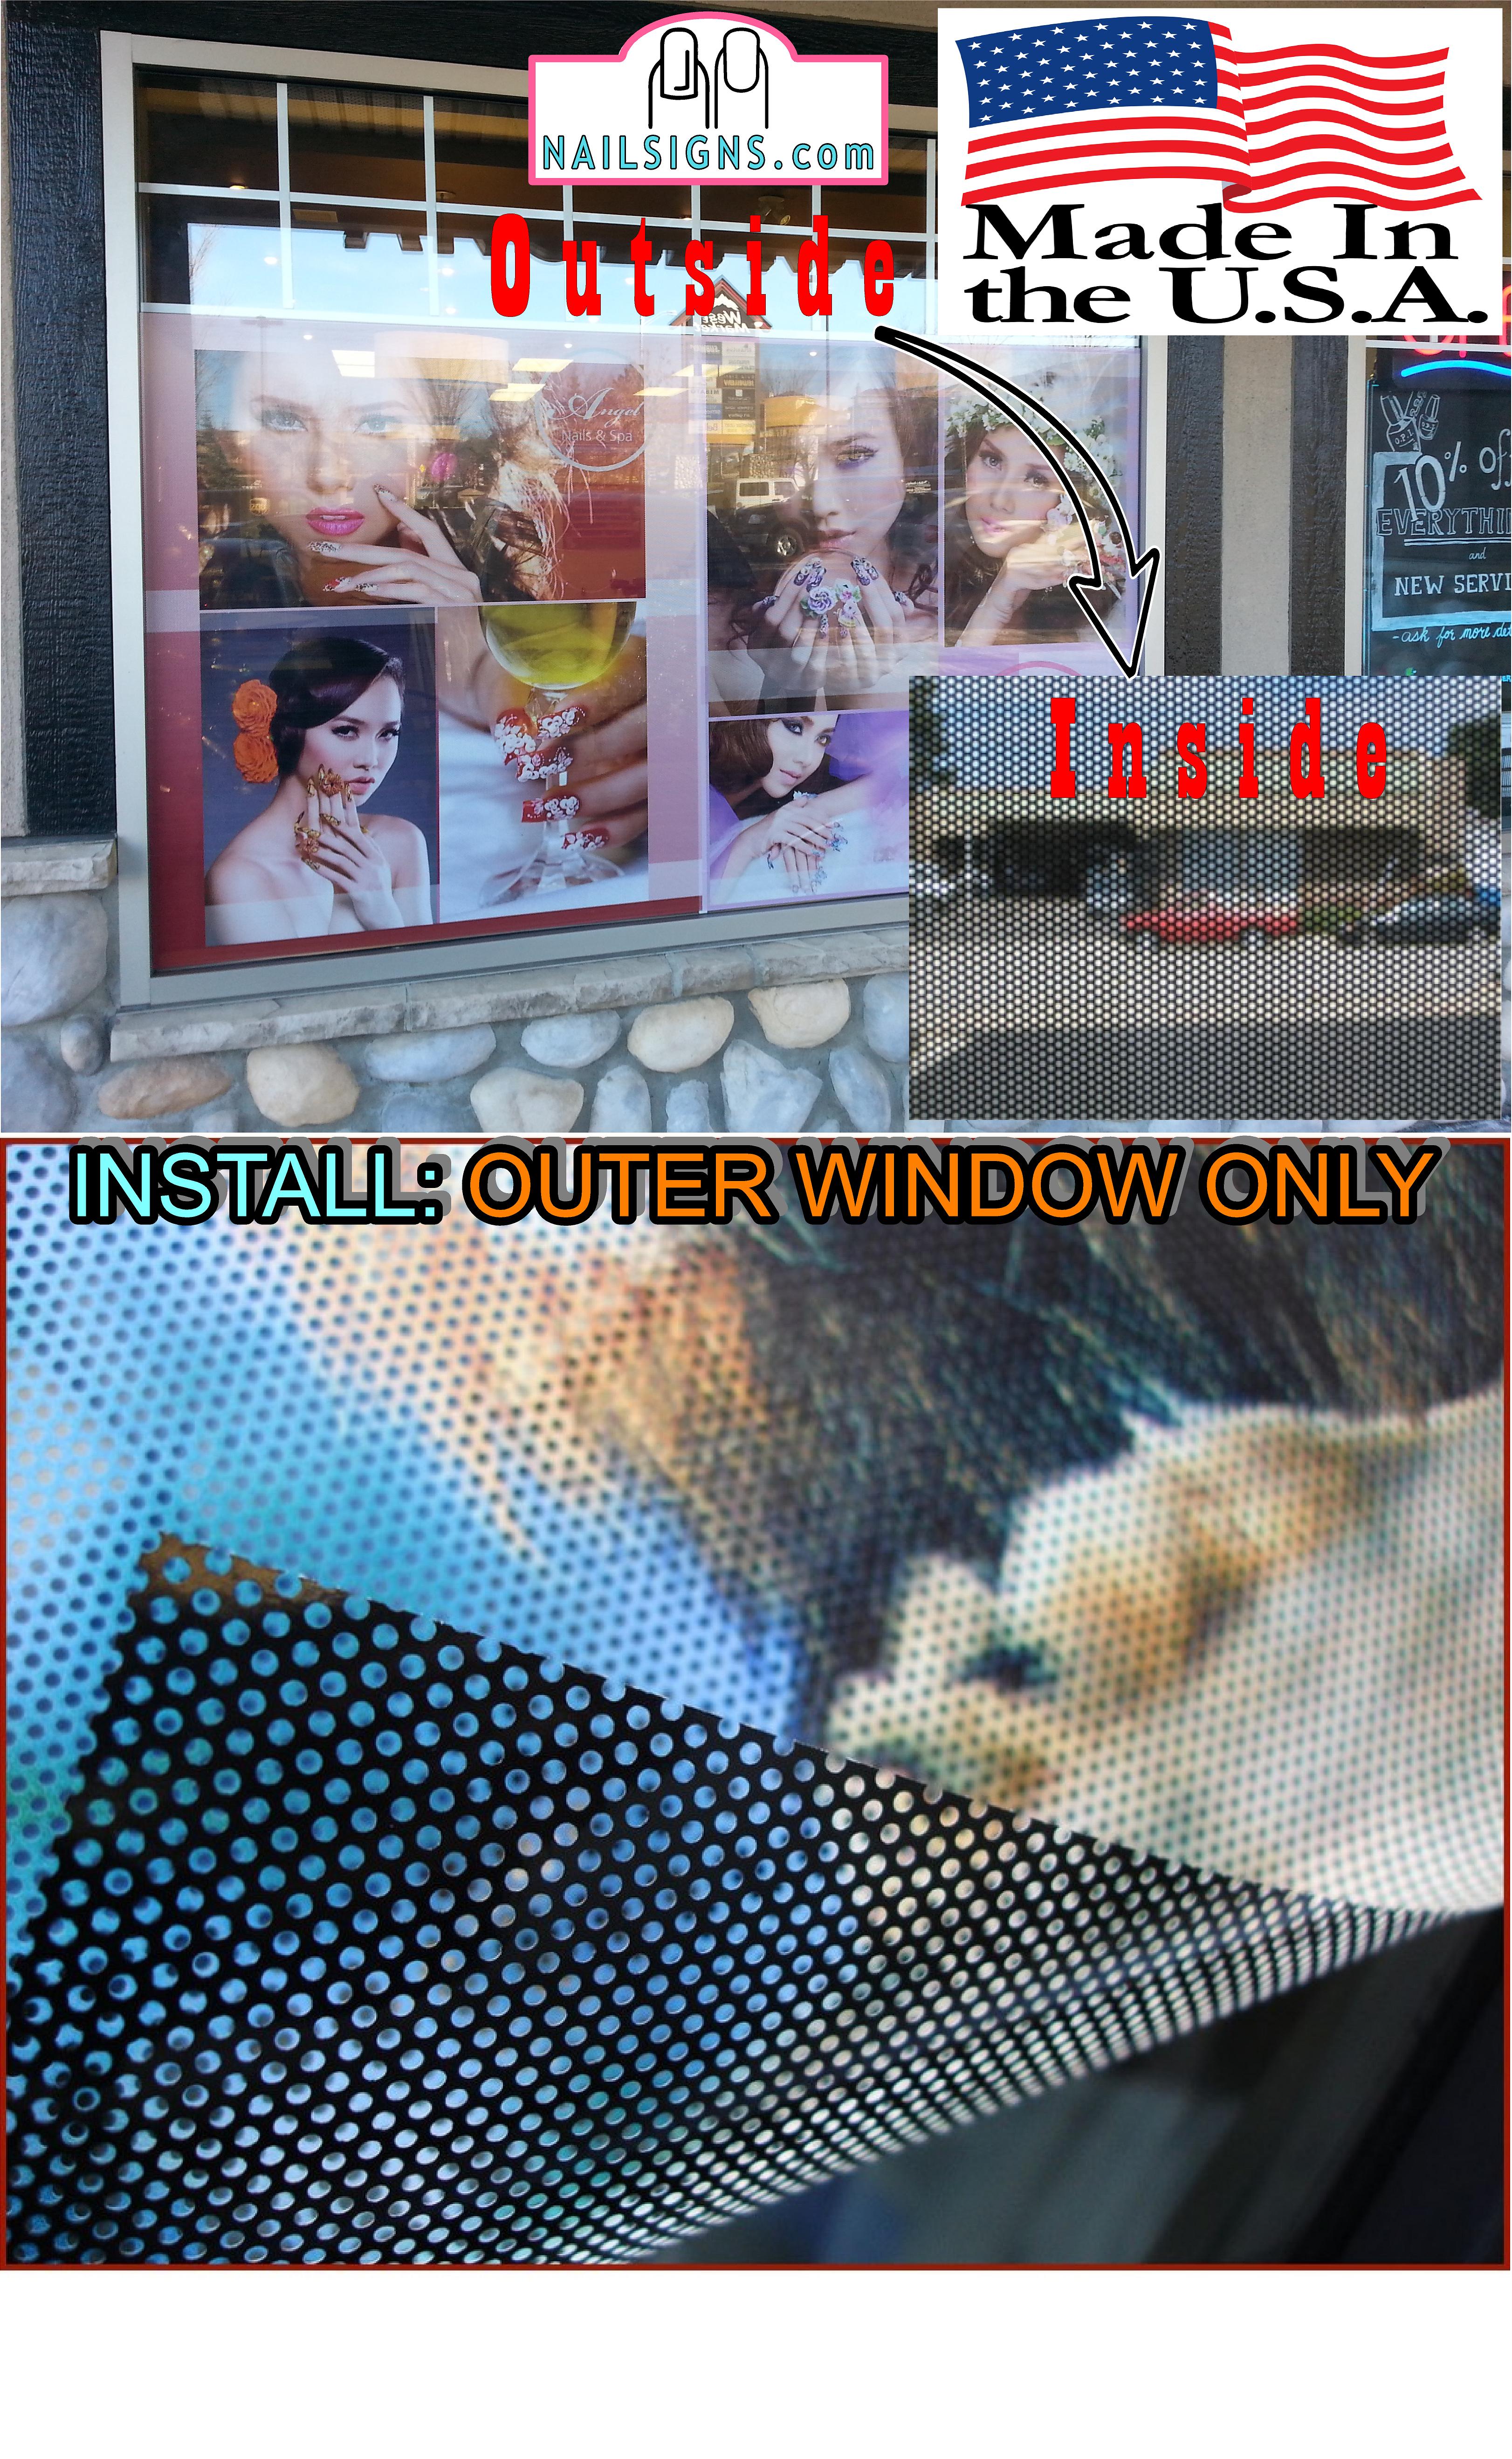 Microblading 02 Perforated Mesh One Way Vision See-Through Window Vinyl Salon Sign Tattoo Vertical